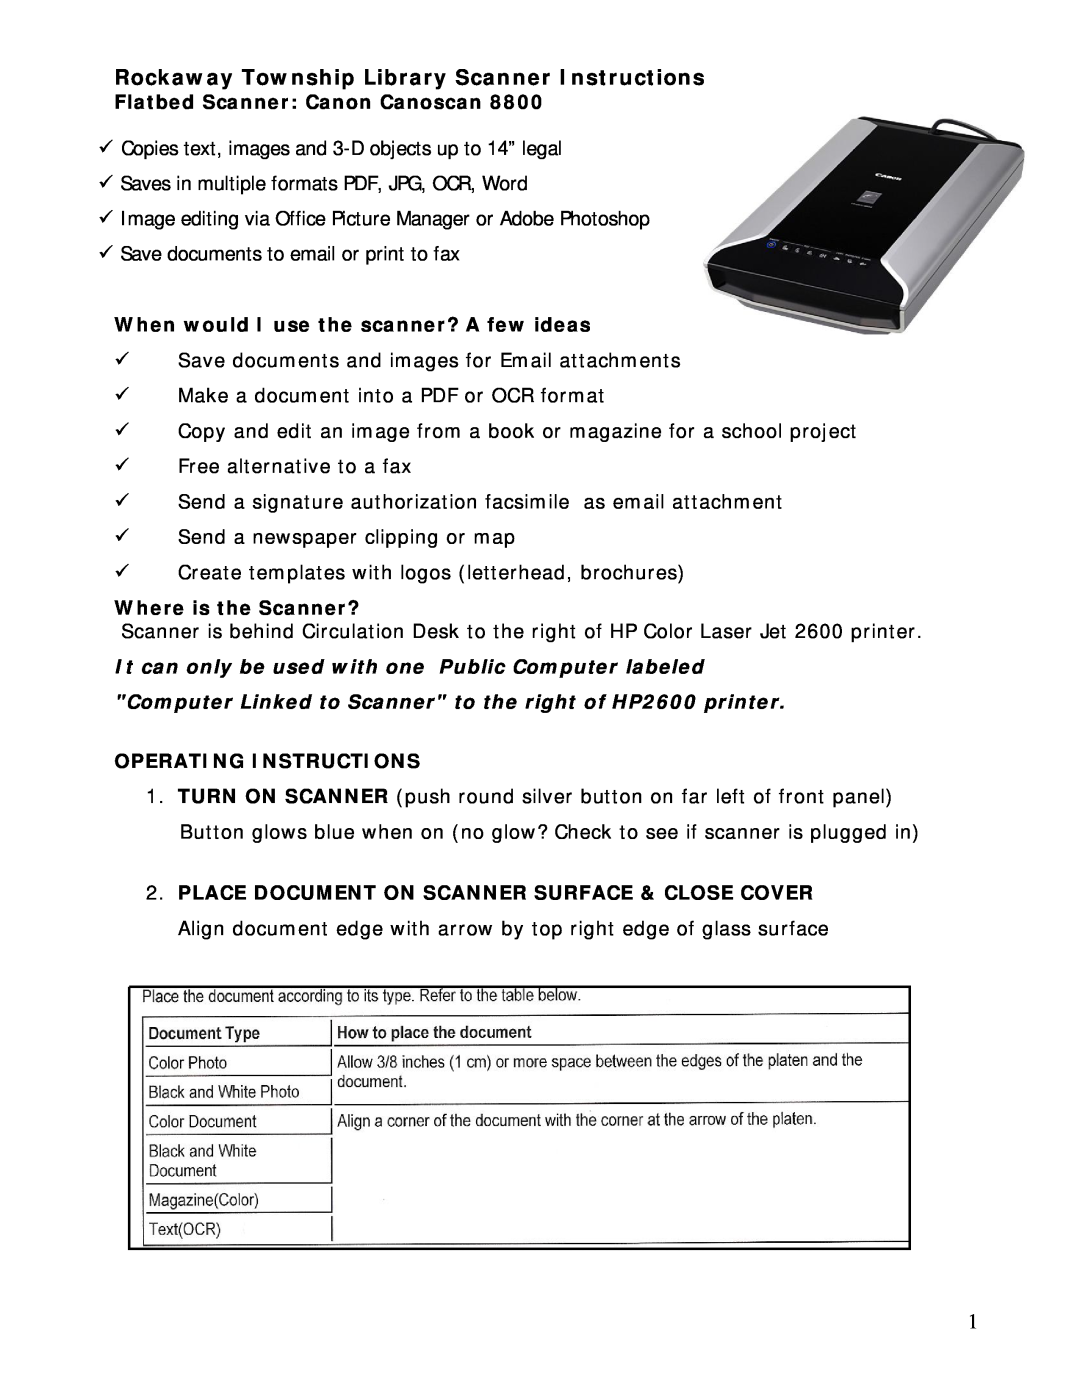 Canon 8800 brochure Rockaway Township Library Scanner Instructions, Flatbed Scanner Canon Canoscan, Where is the Scanner? 